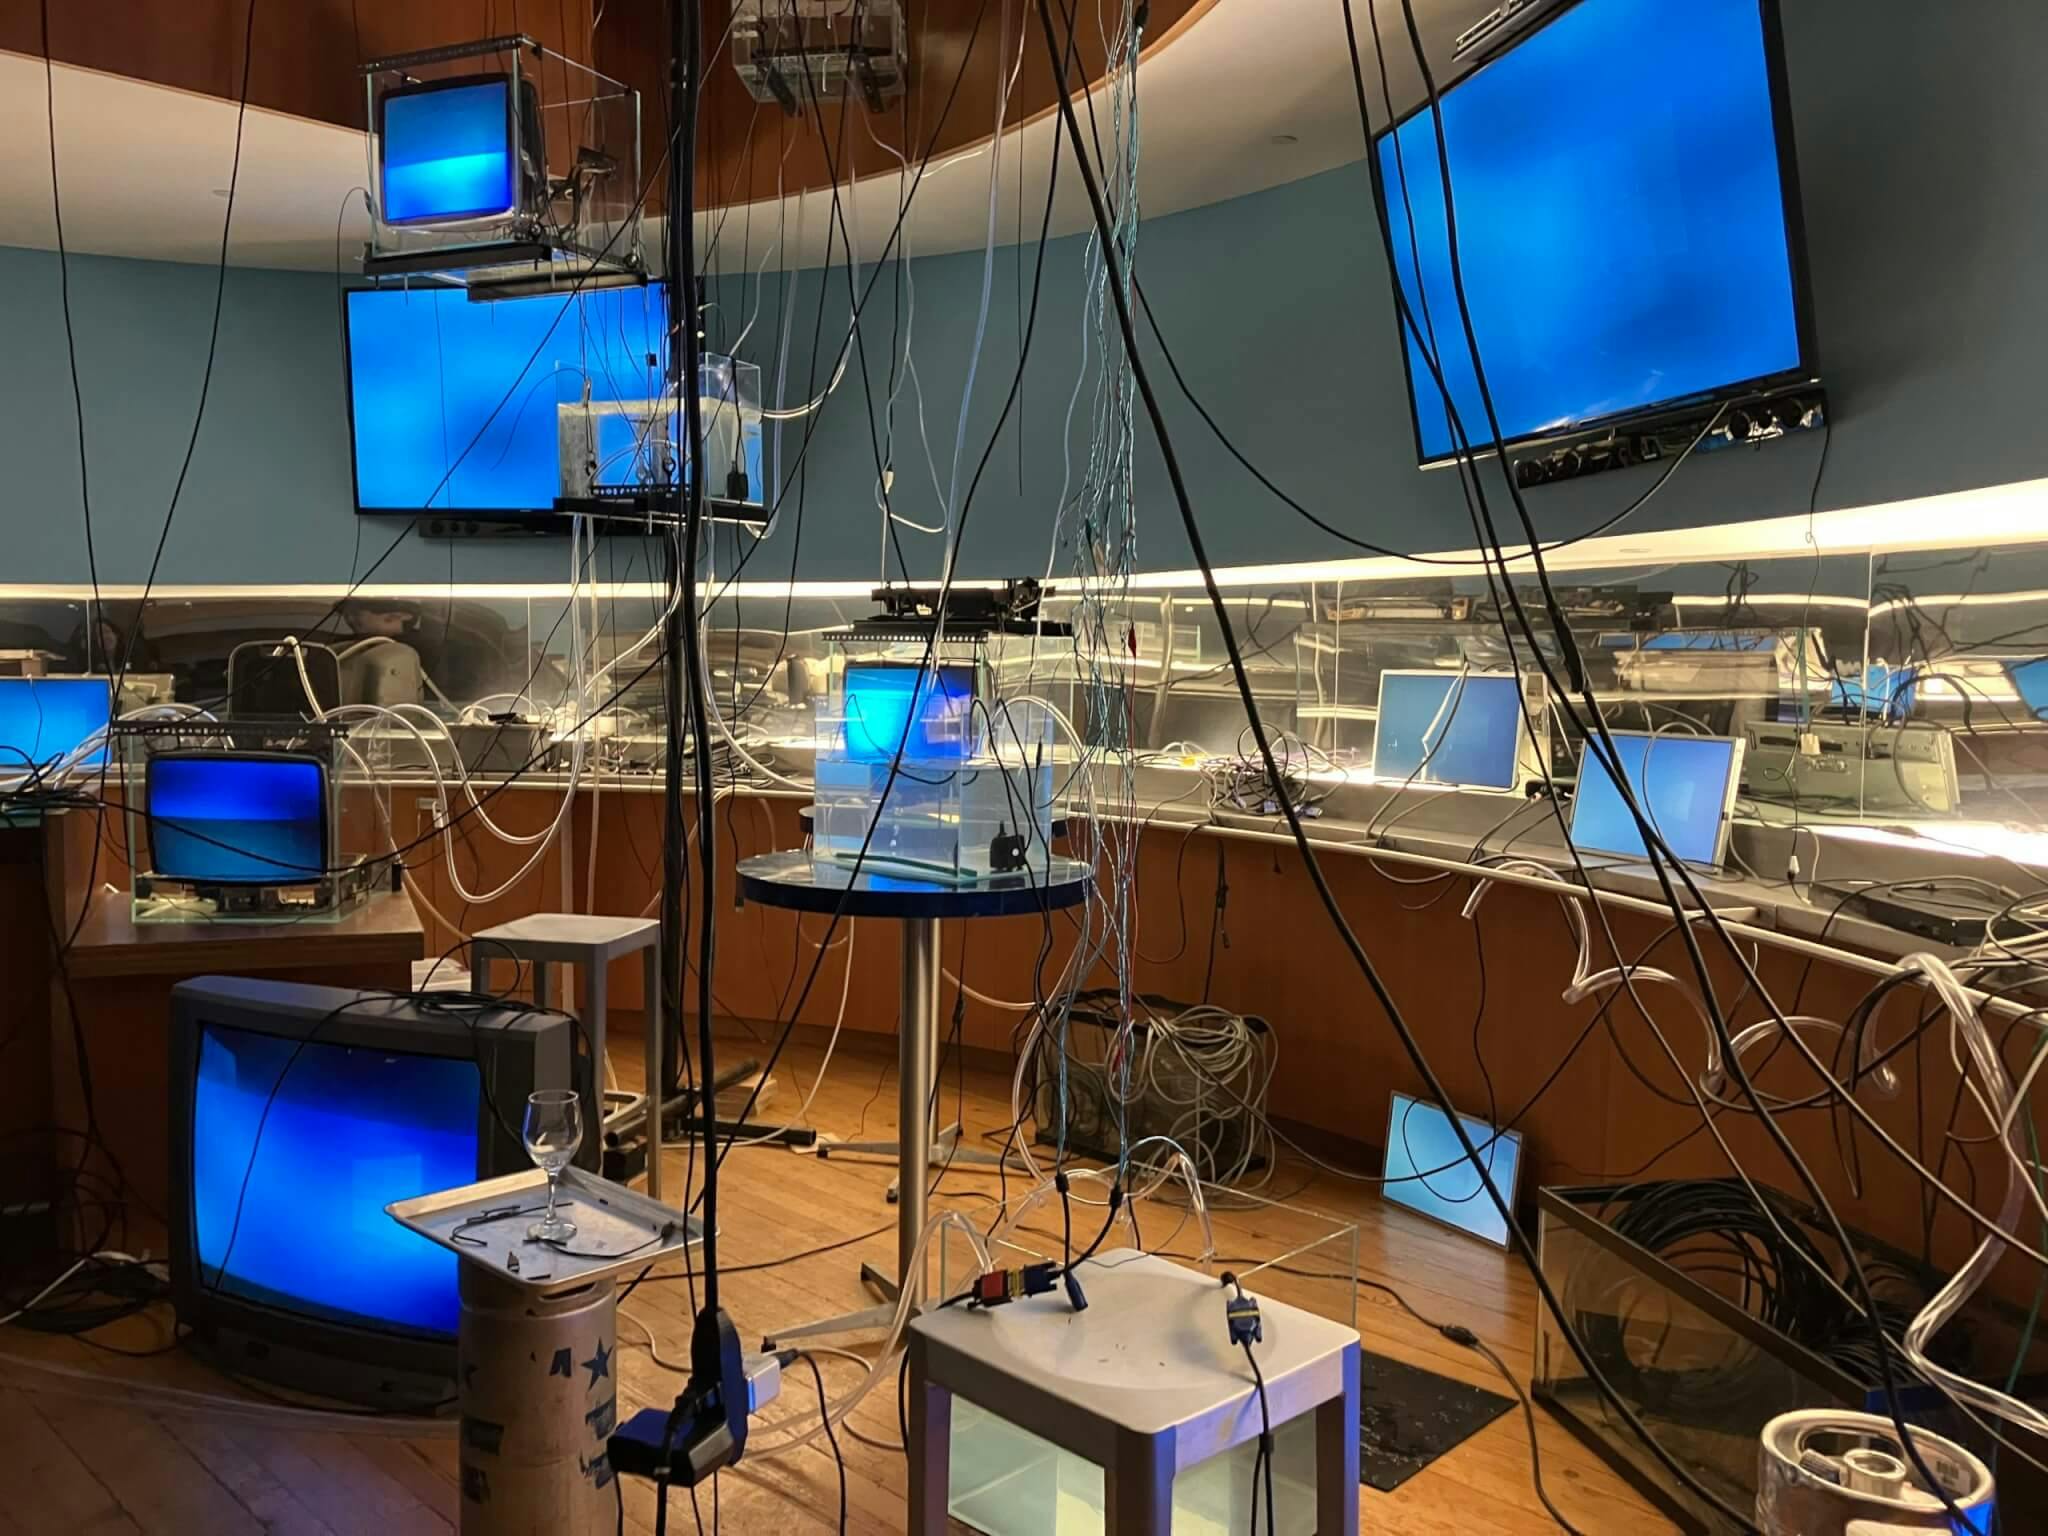 An assortment of blue screens with wires dangling from them fill the space.